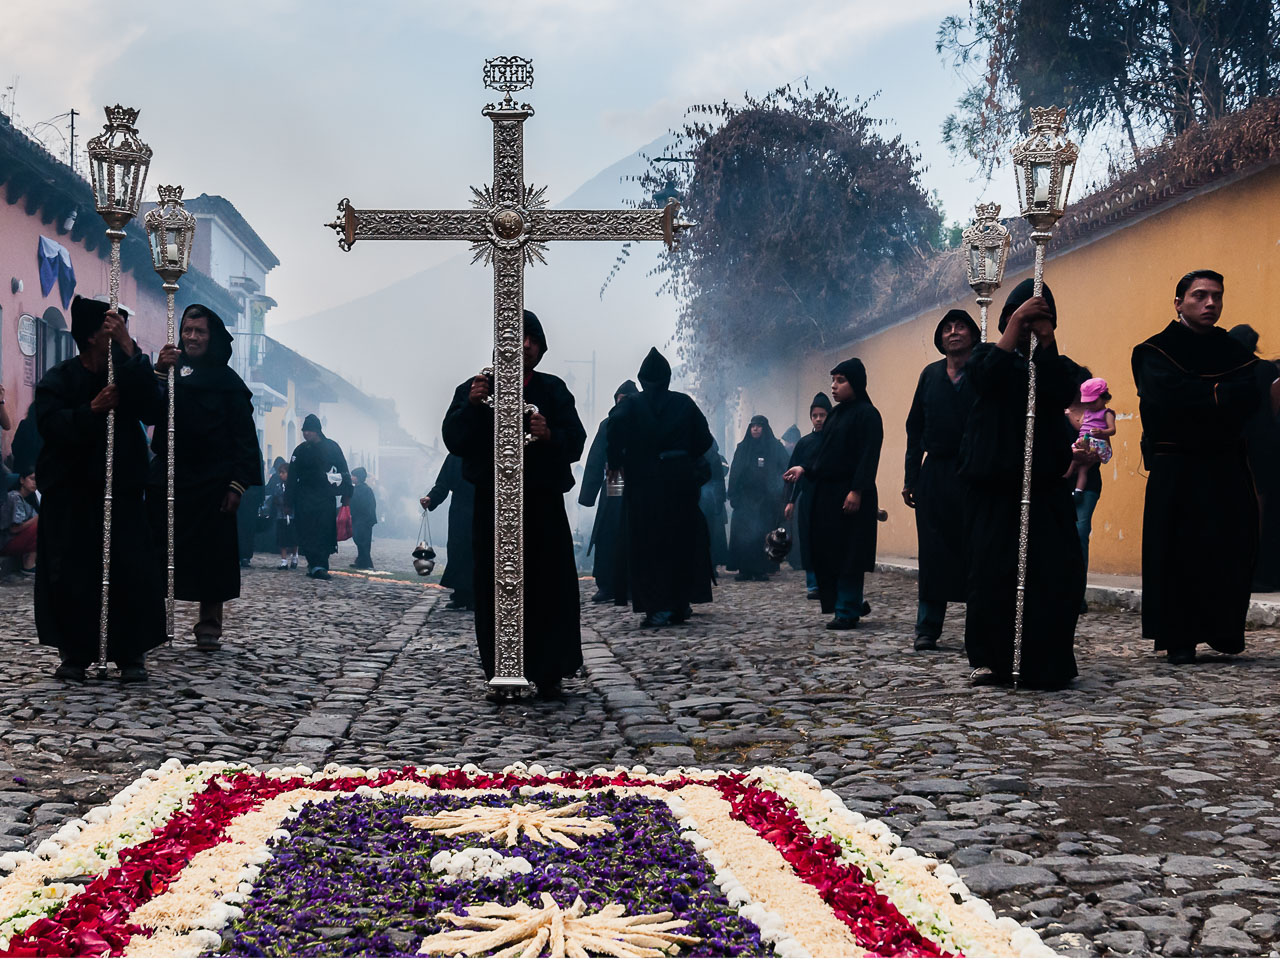 AN120678-Edit-At-the-head-of-the-procession.jpg